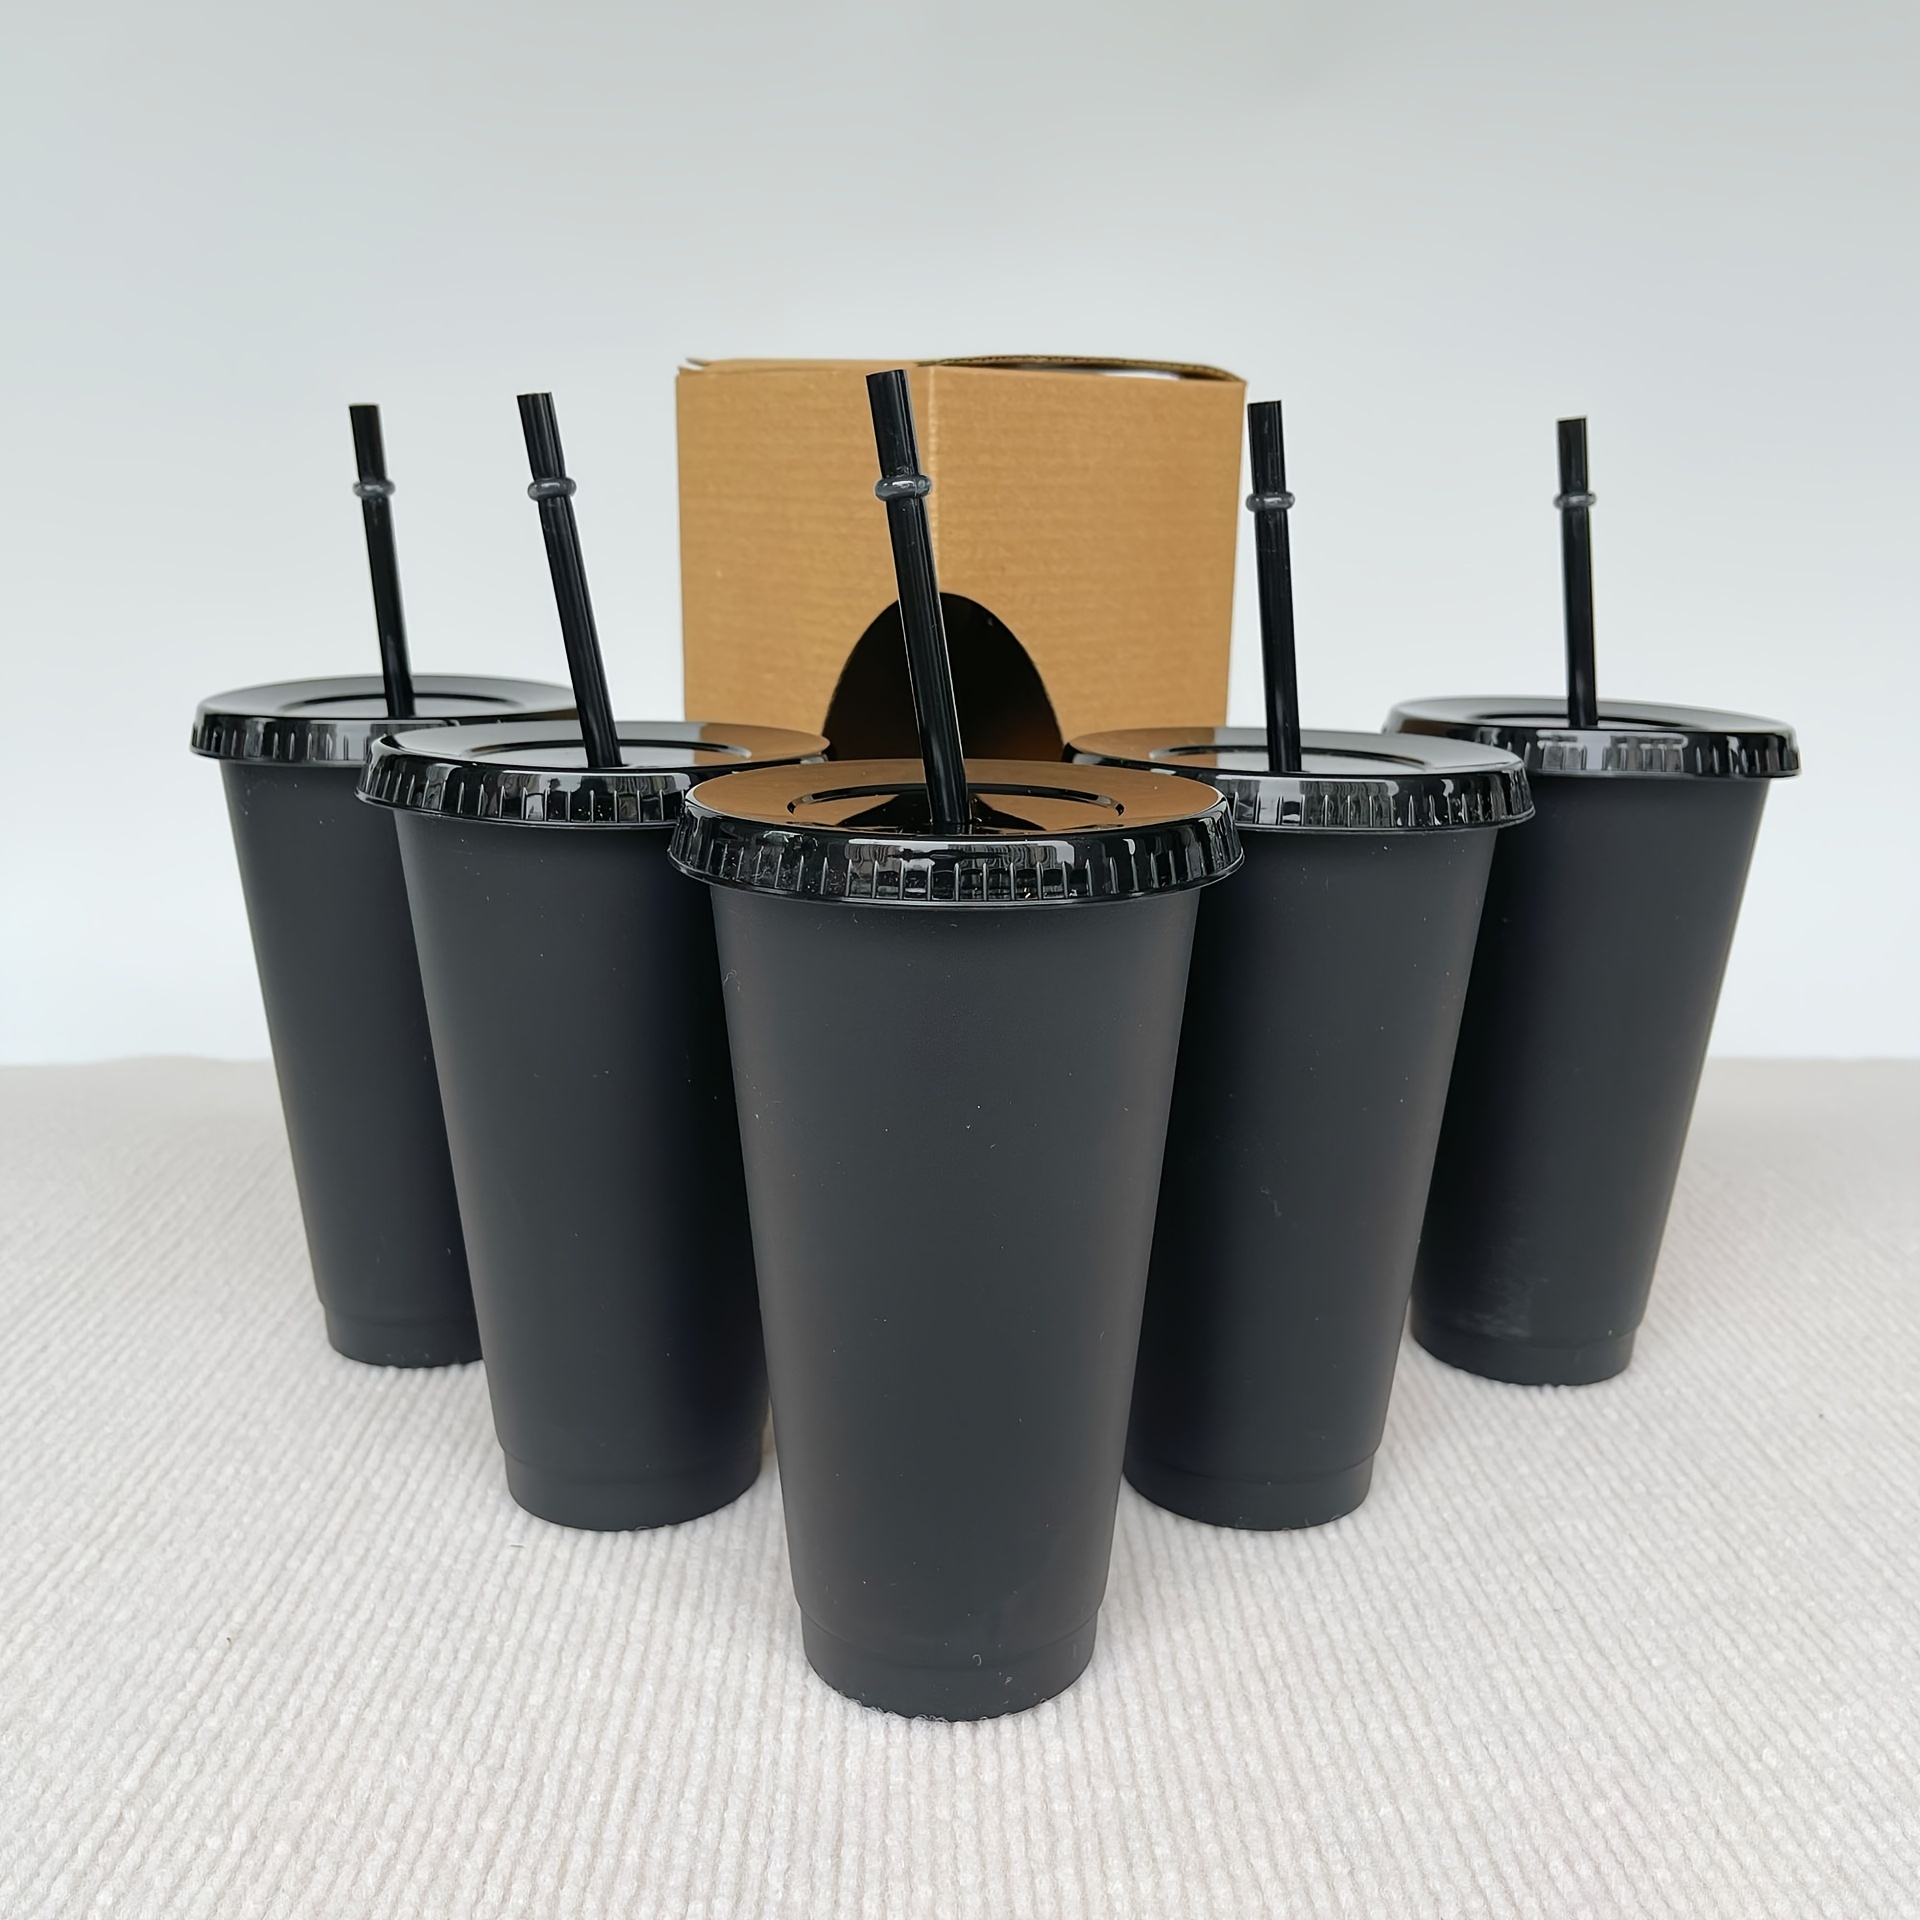 Reusable Plastic Cups With Straws And Lids, Water Tumblers Iced Coffee Cups,  Black And Cream Color Water Bottle Travel Mug Cup Party Cups Bulk, Diy Cups,  Smoothie Cups To Go, Transparent And